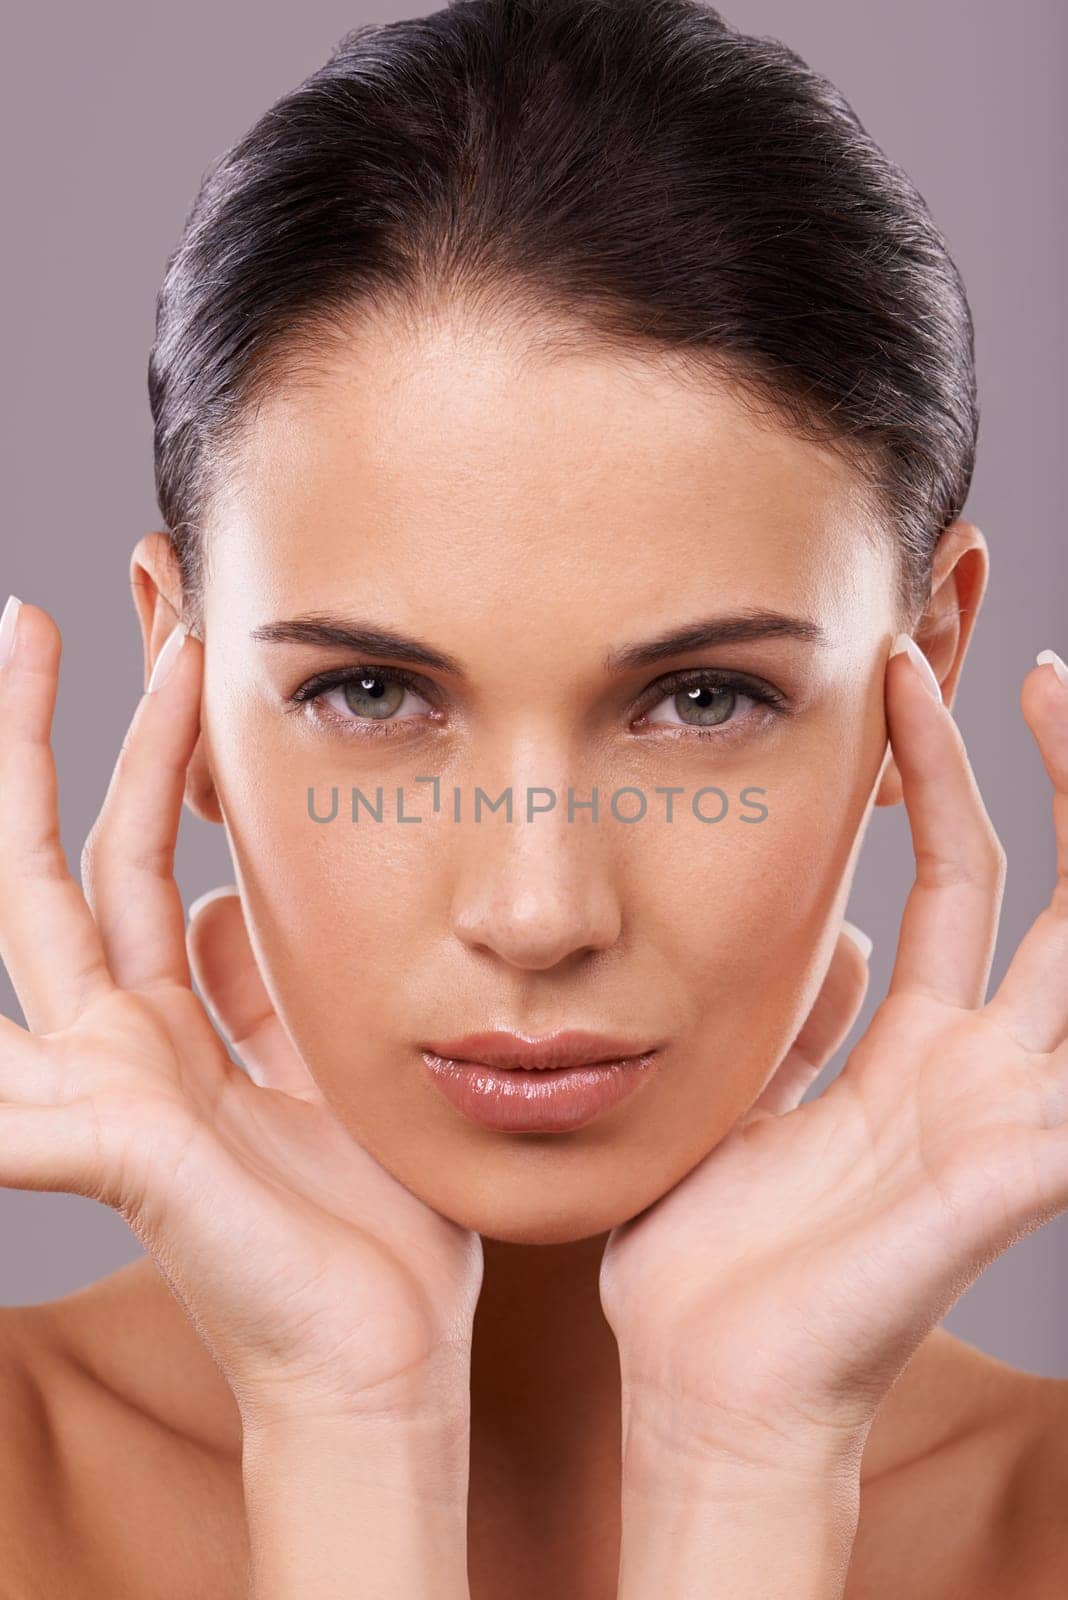 Gorgeous in every way. Beauty shot of a beautiful young woman with perfect skin against a gray background